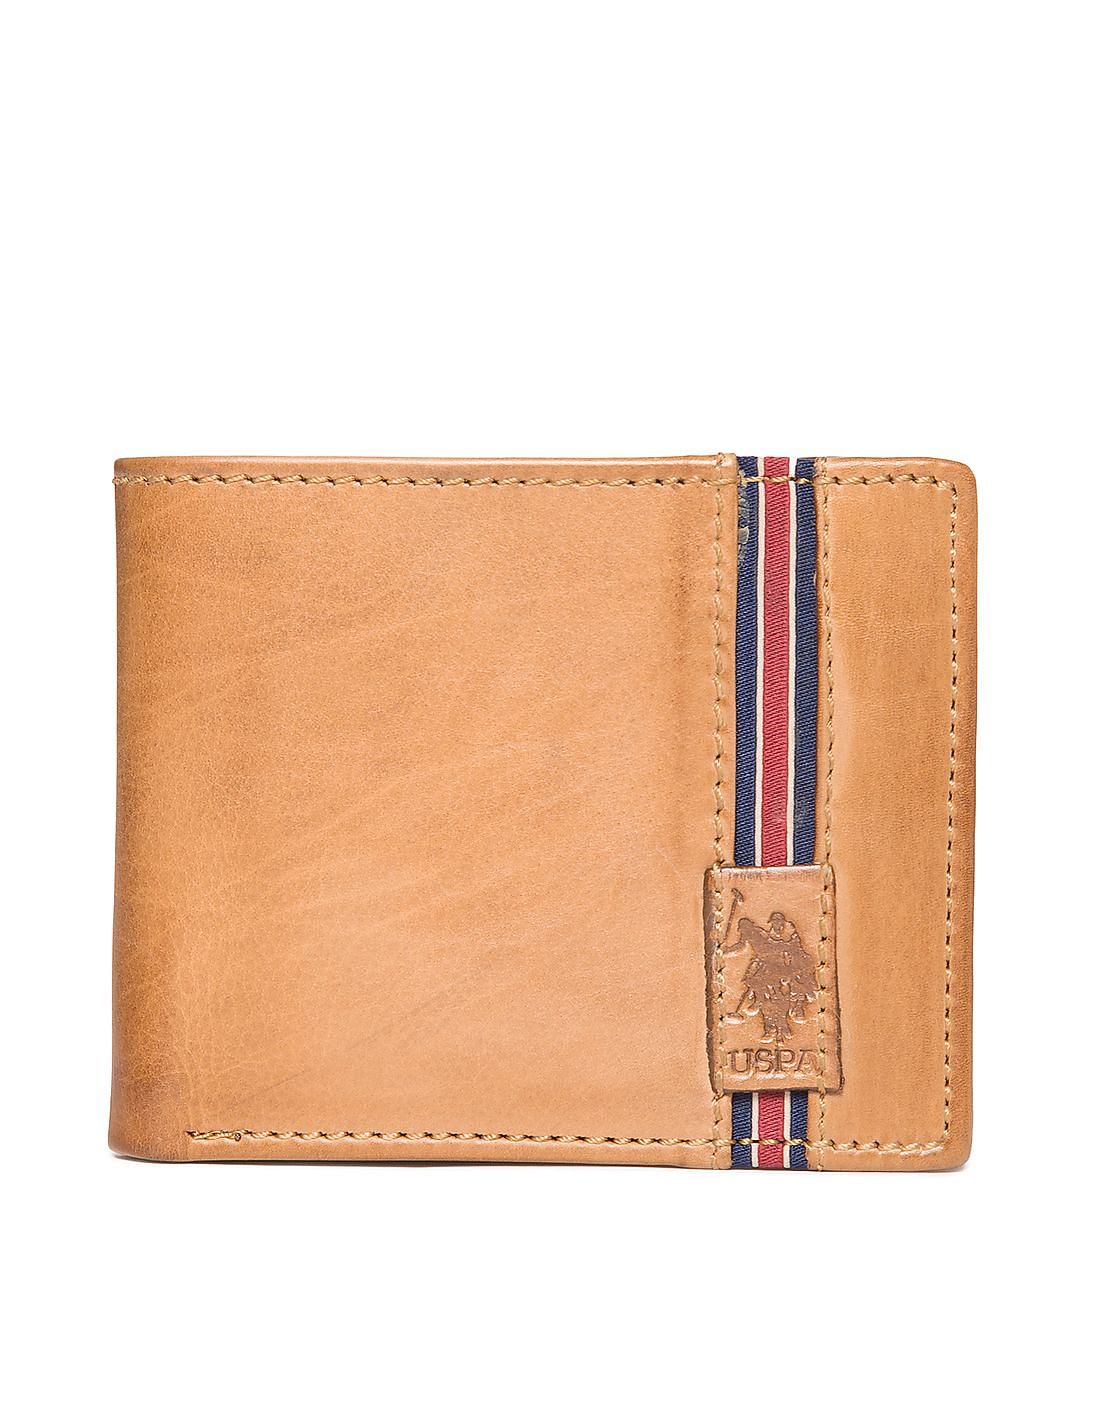 Buy U.S. Polo Assn. Men Striped Panel Leather Wallet - NNNOW.com